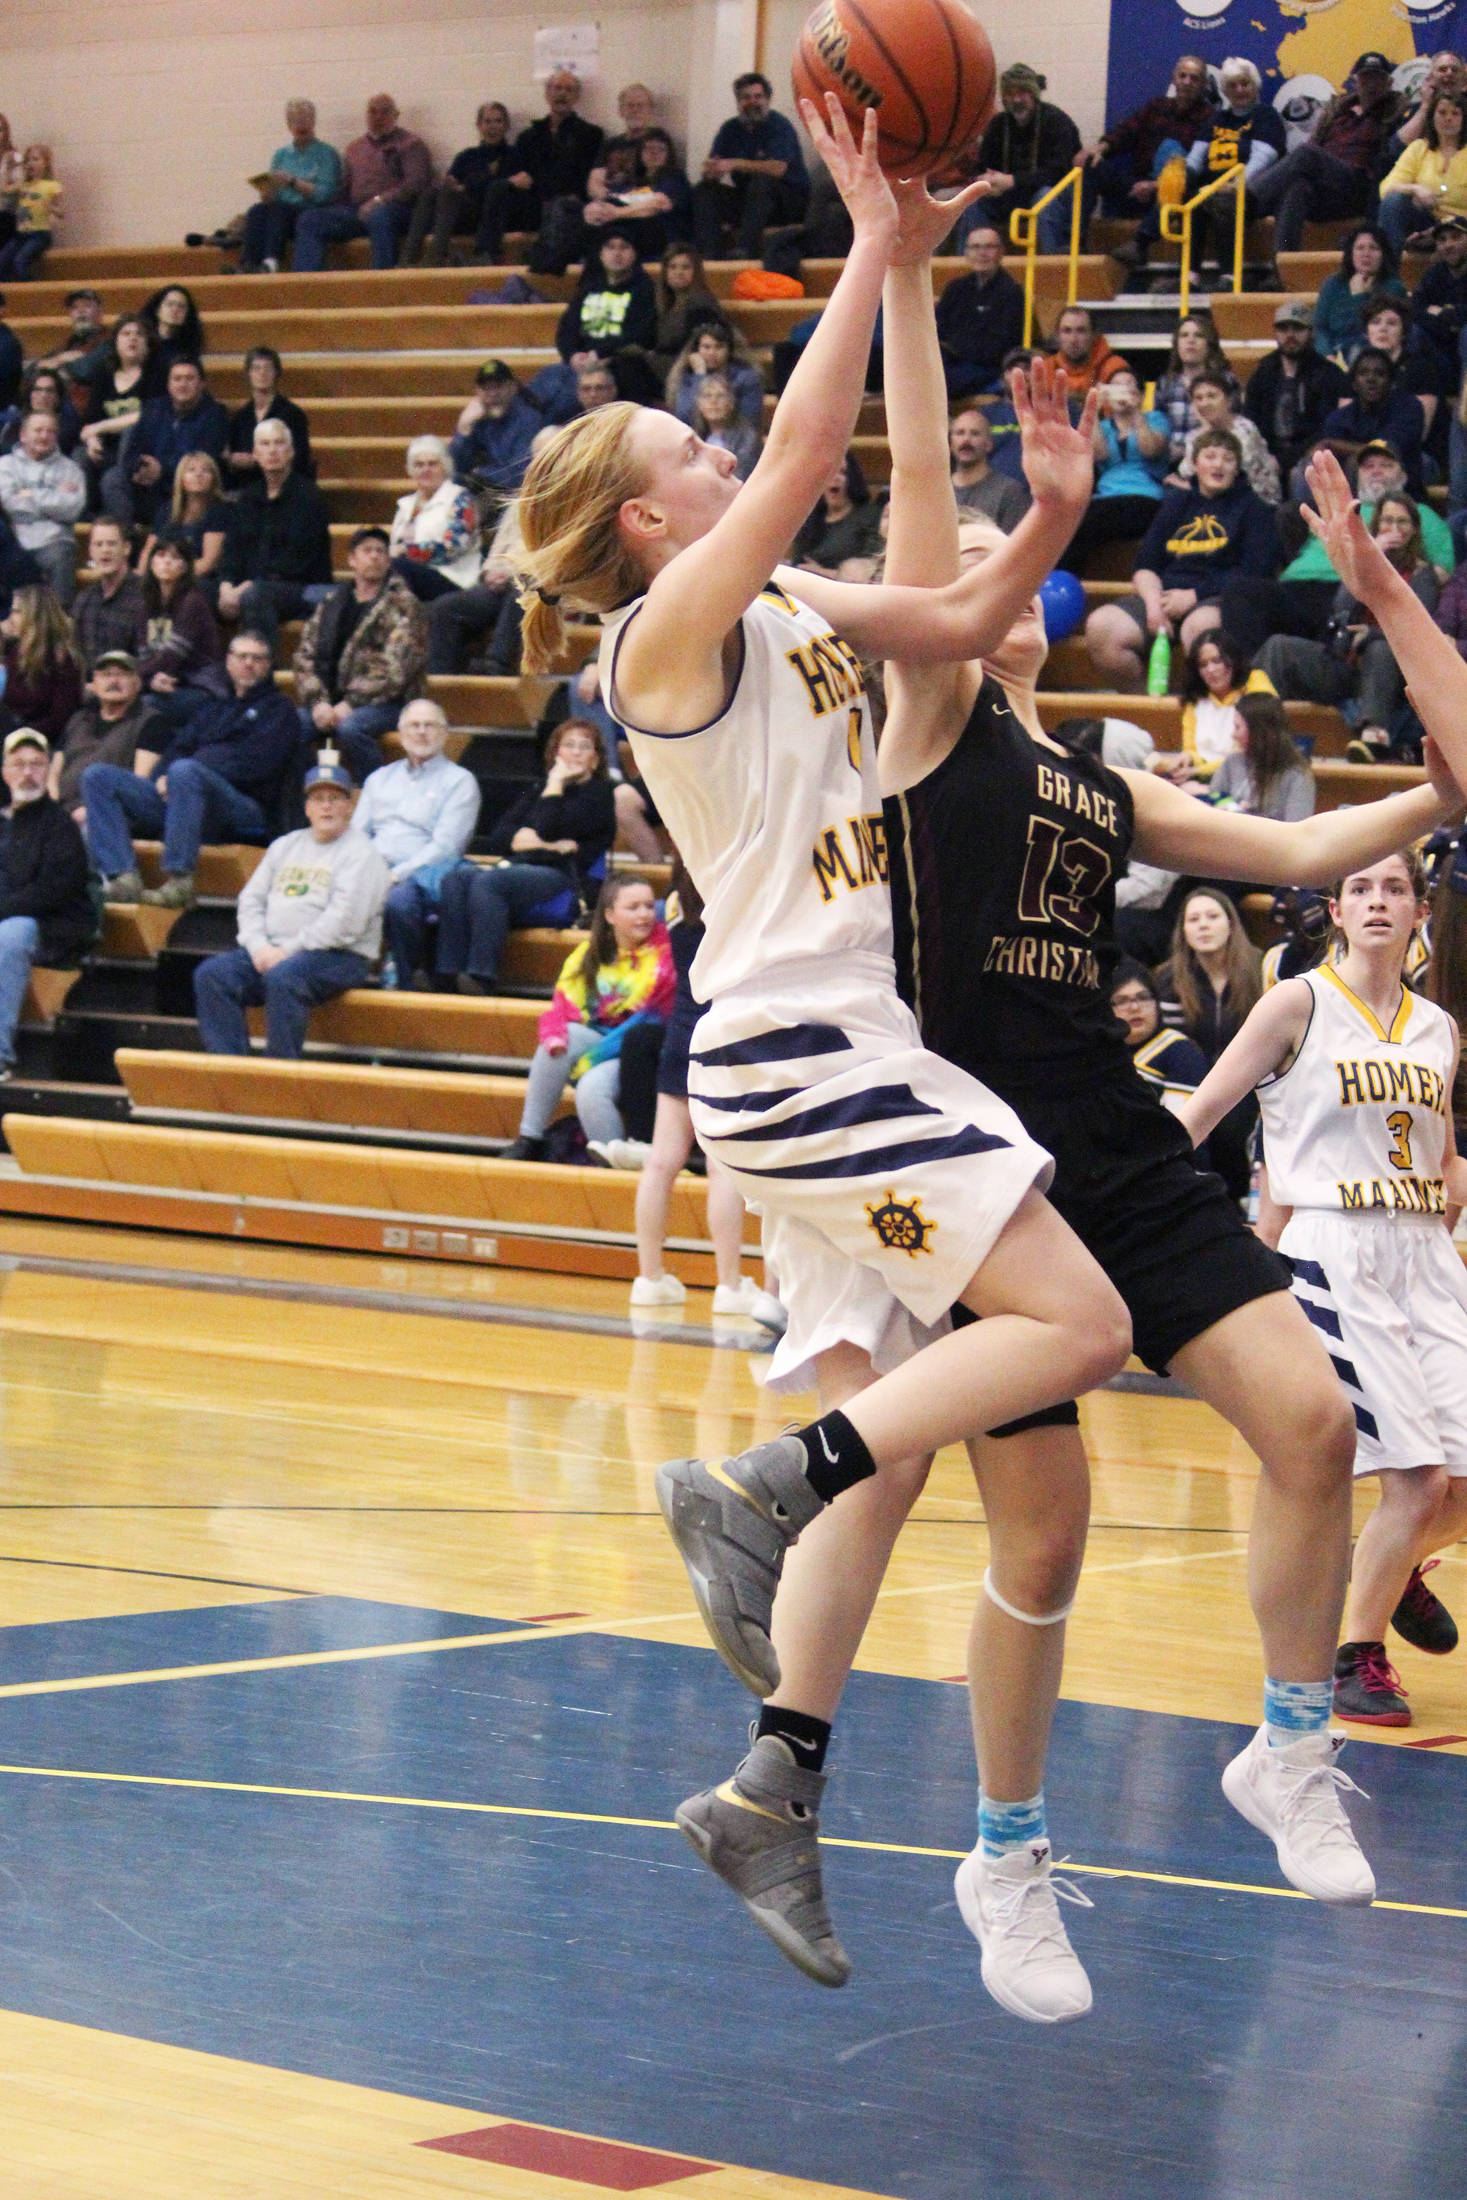 Homer’s Kelli Bishop takes a shot on the Grace Christian School basket during a Friday, Feb. 22, 2019 game in Homer, Alaska. Grace is one of three private school teams in Region 3A basketball. (Photo by Megan Pacer/Homer News)